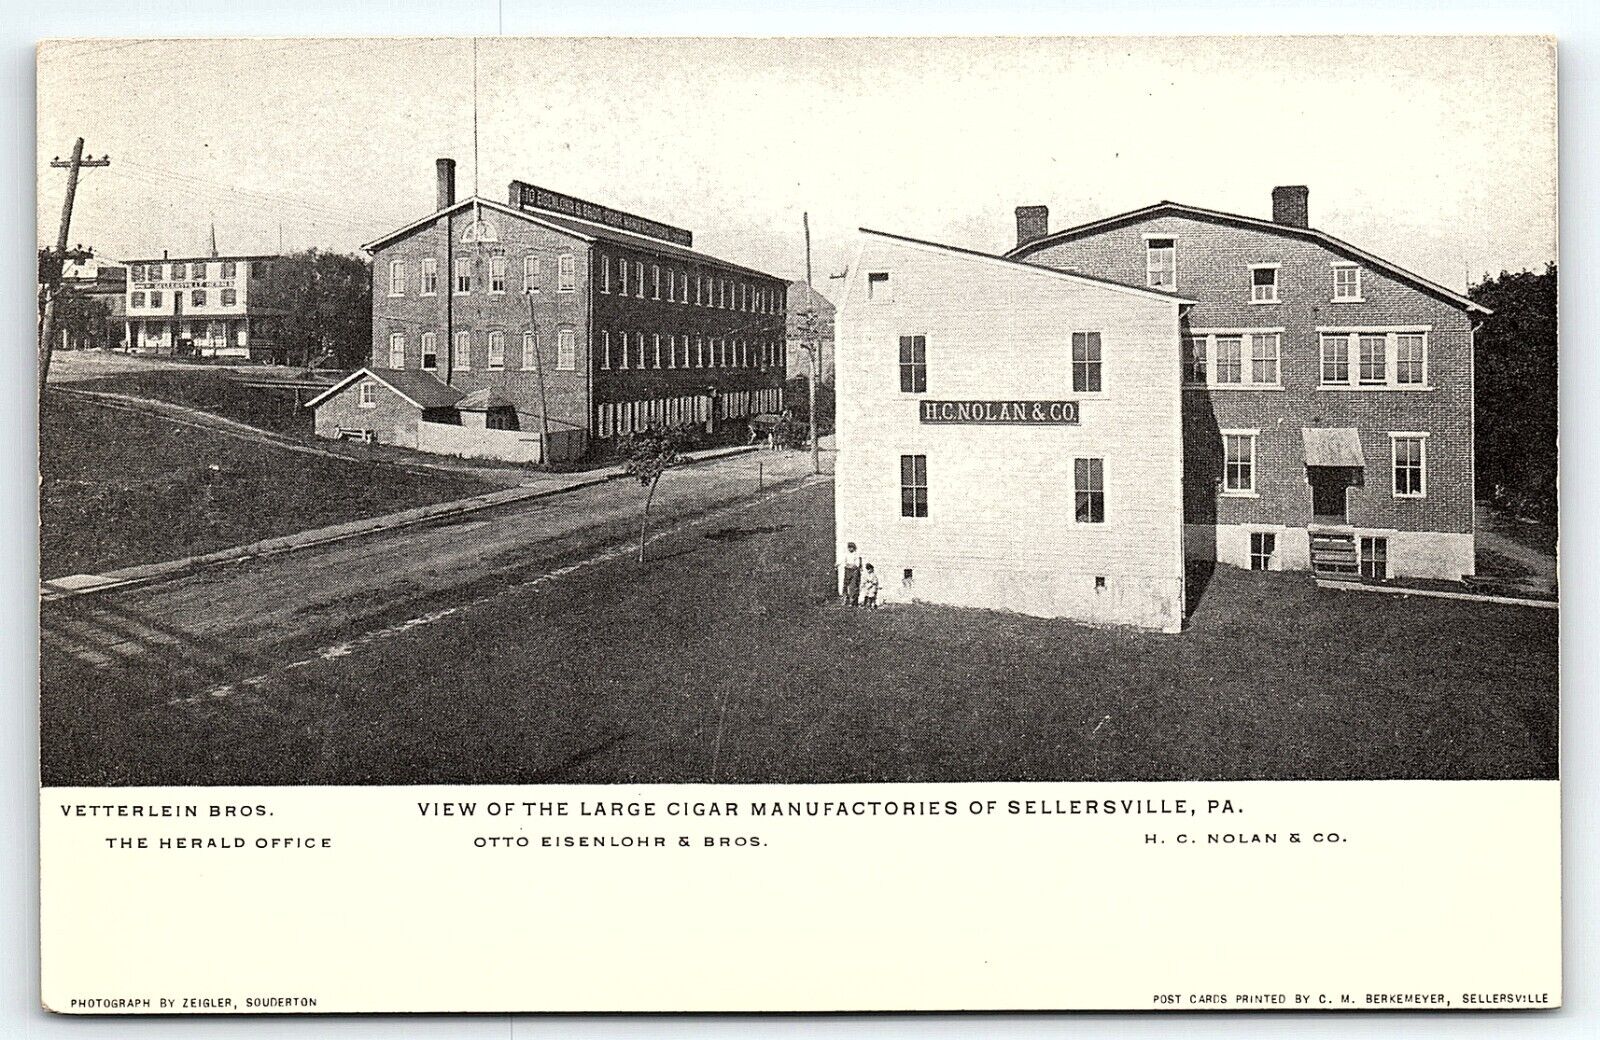 c1905 SELLERSVILLE PA VIEW OF THE LARGE CIGAR MANUFACTORIES EARLY POSTCARD P3949